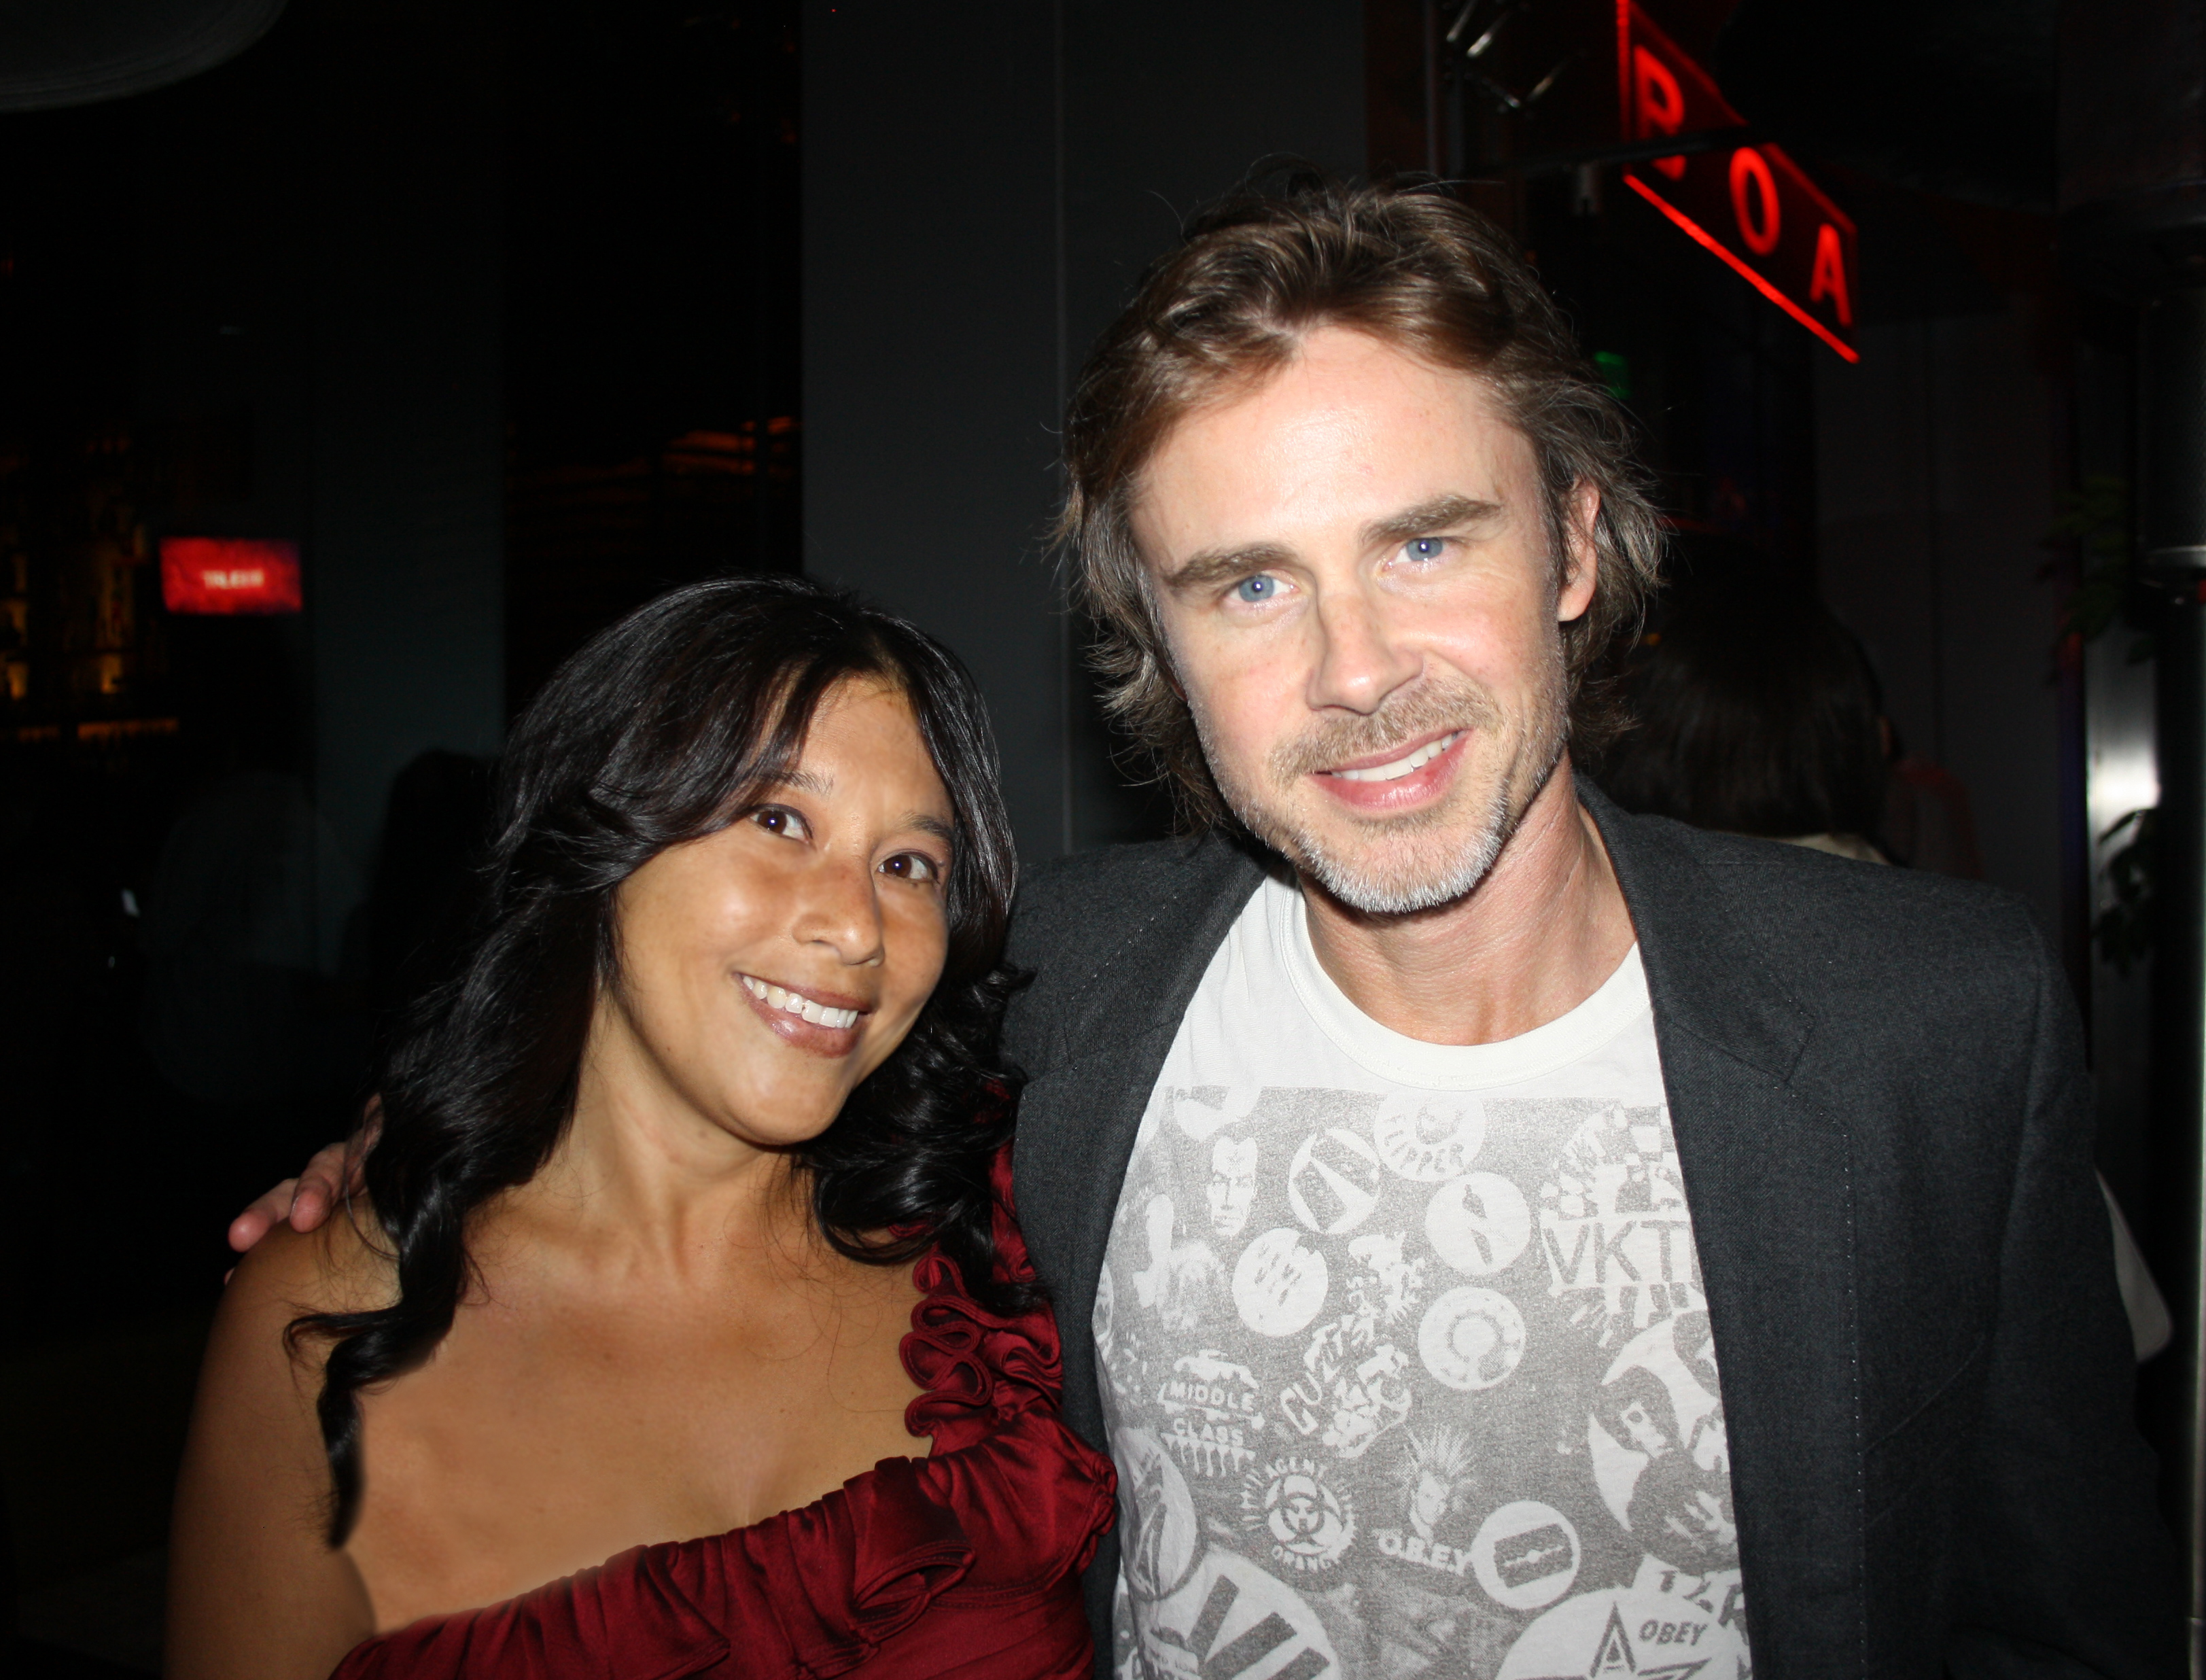 Jenna Urban and Sam Trammell at the True Blood wrap party